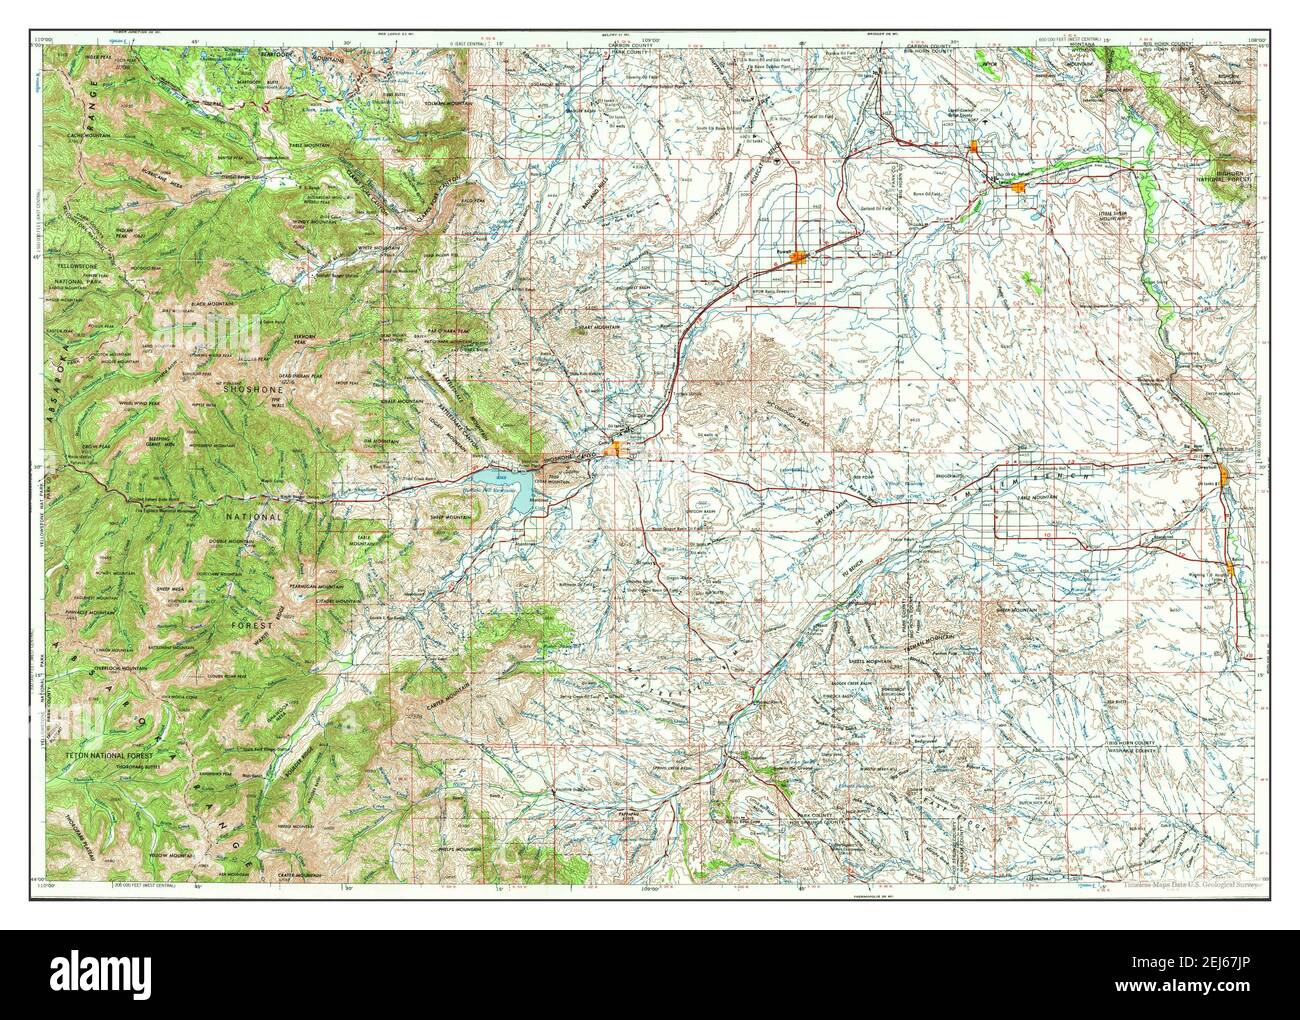 Cody, Wyoming, map 1955, 1:250000, United States of America by Timeless Maps, data U.S. Geological Survey Stock Photo